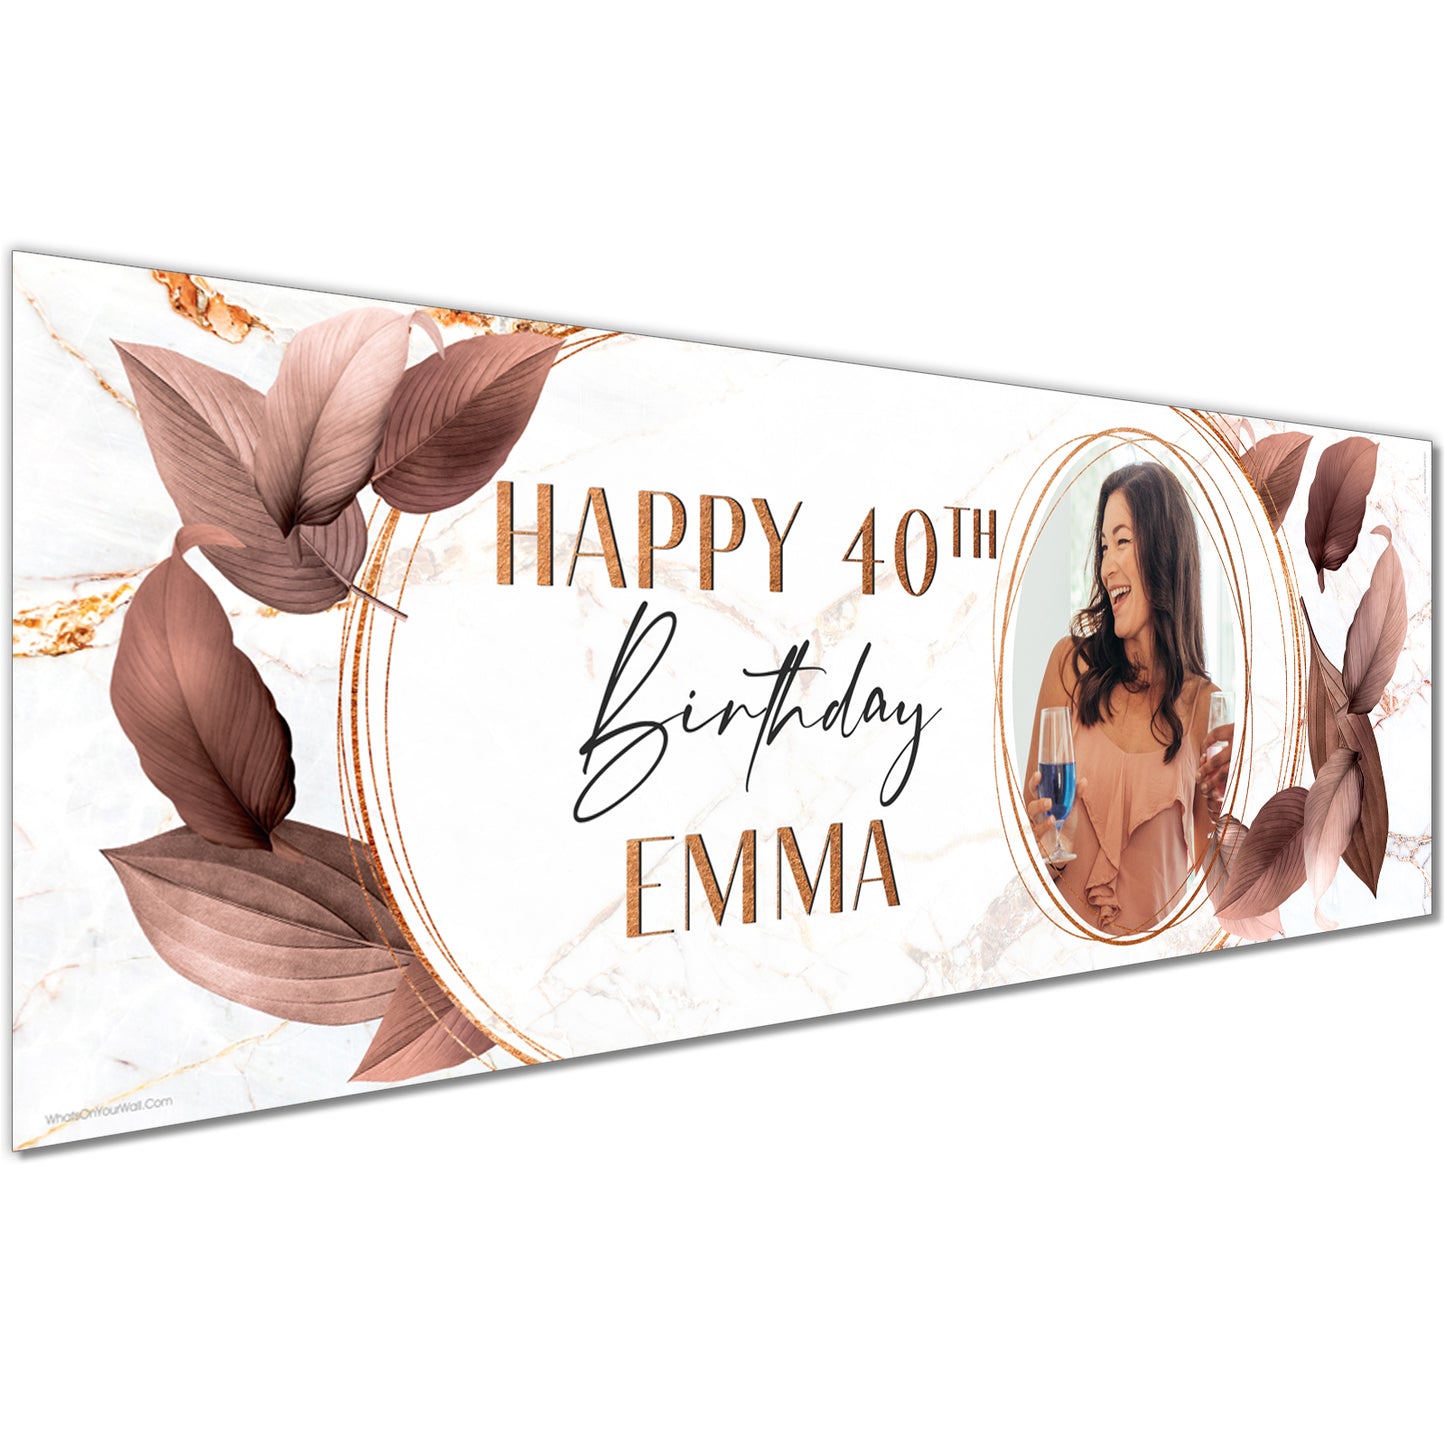 Personalised Birthday Banners in Marble Leaf Design